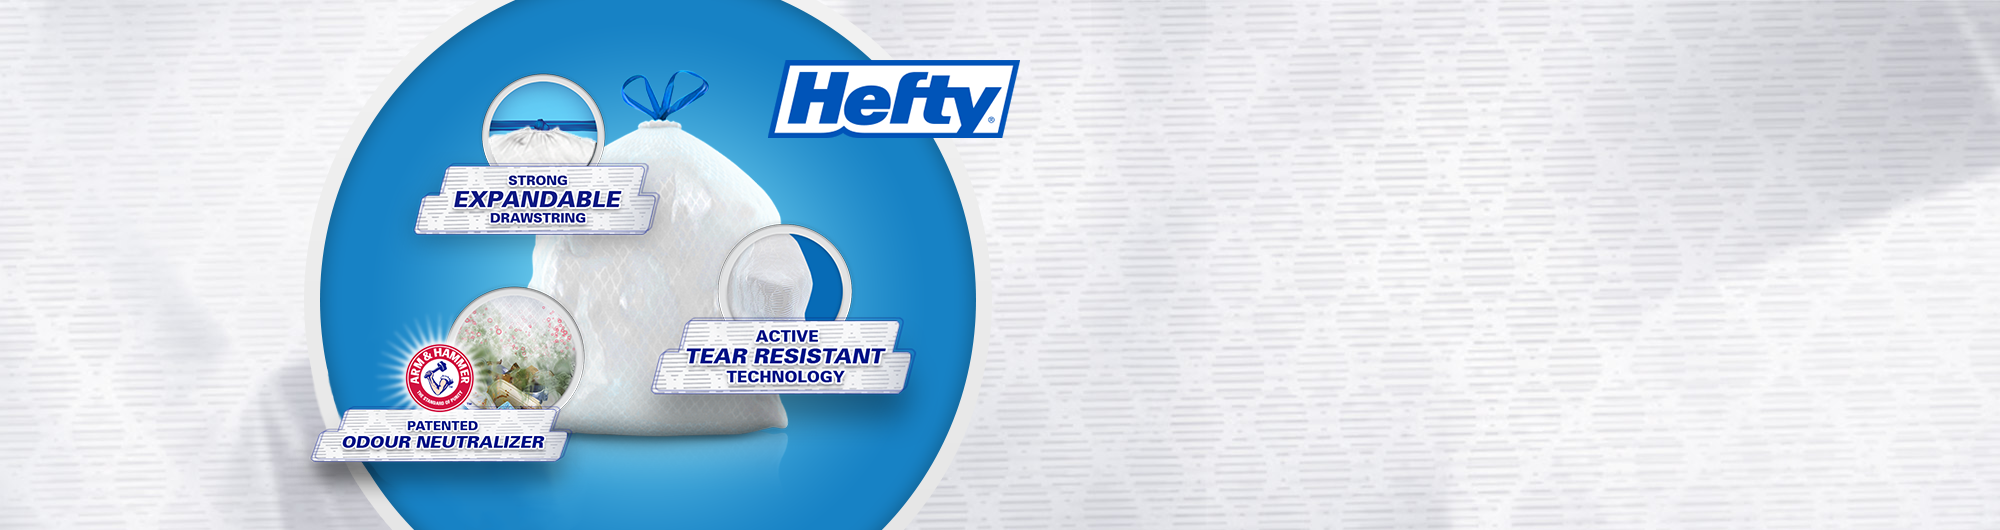 Experience the Hefty Difference